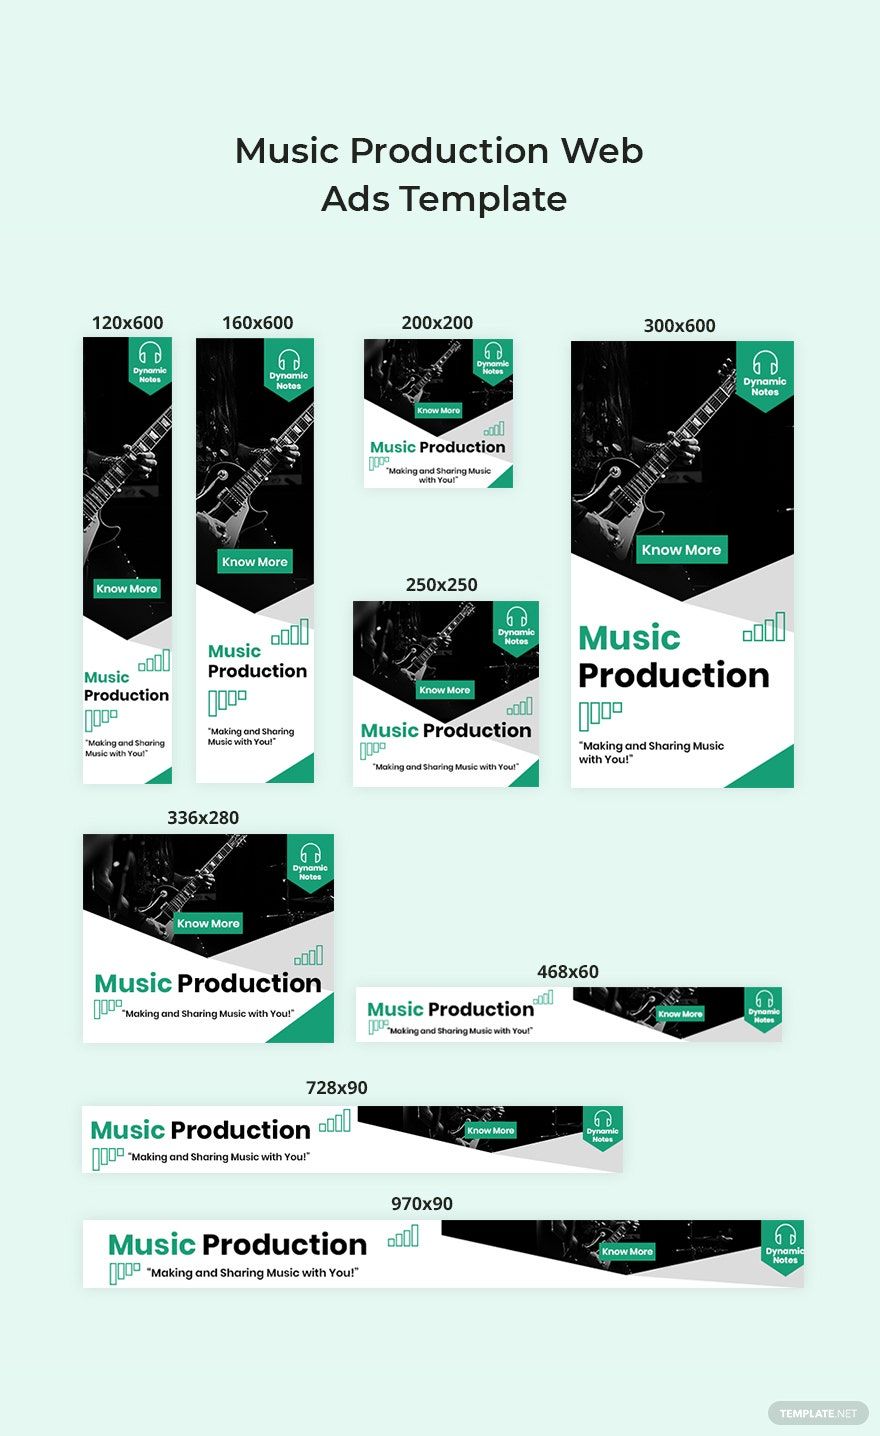 Music Production Web Ads Template